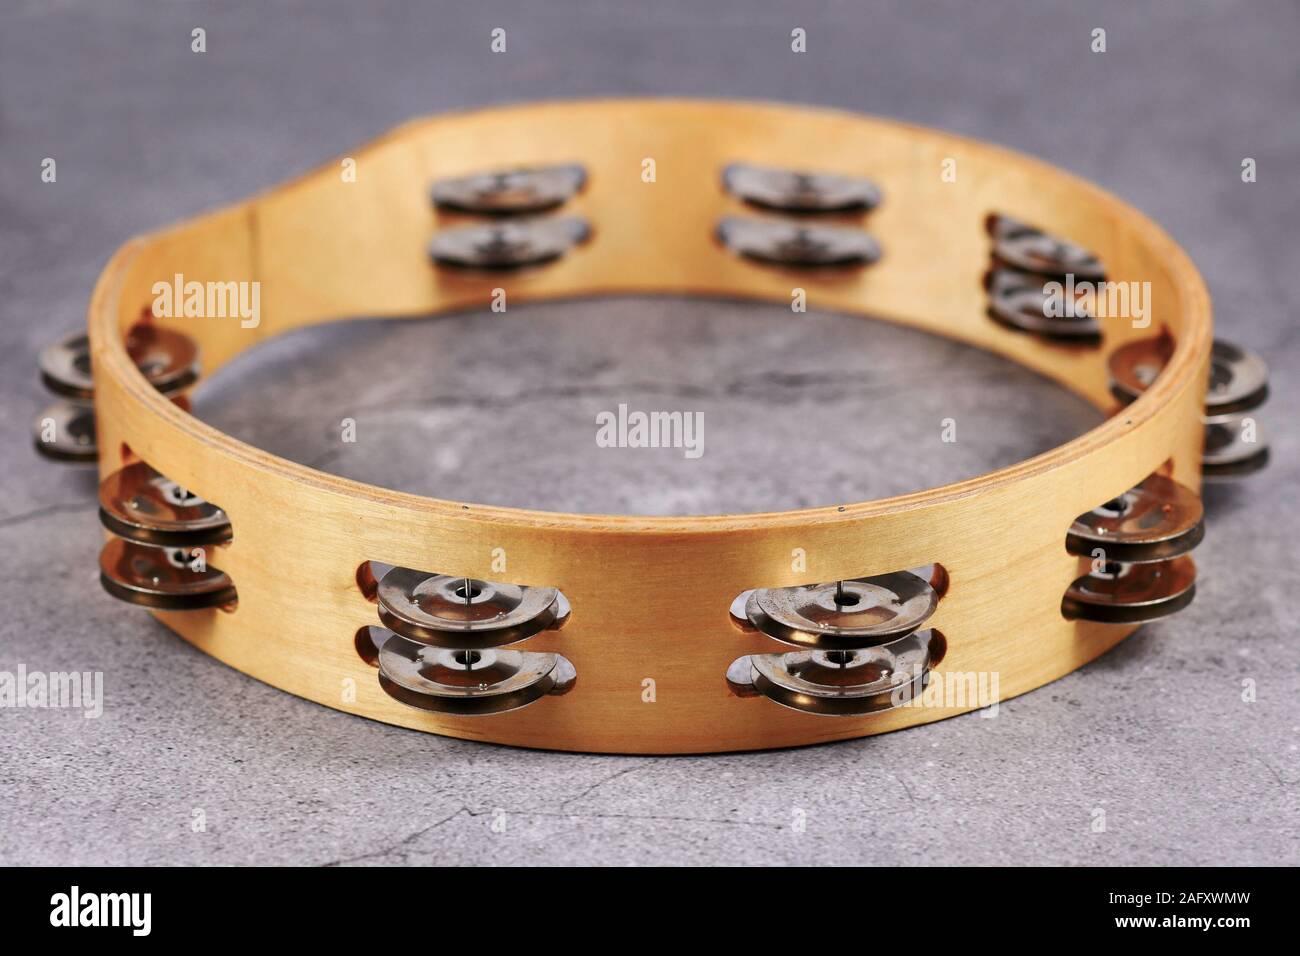 Tambourine percussion music instrument with small metal jingles called 'Zills' on gray background Stock Photo